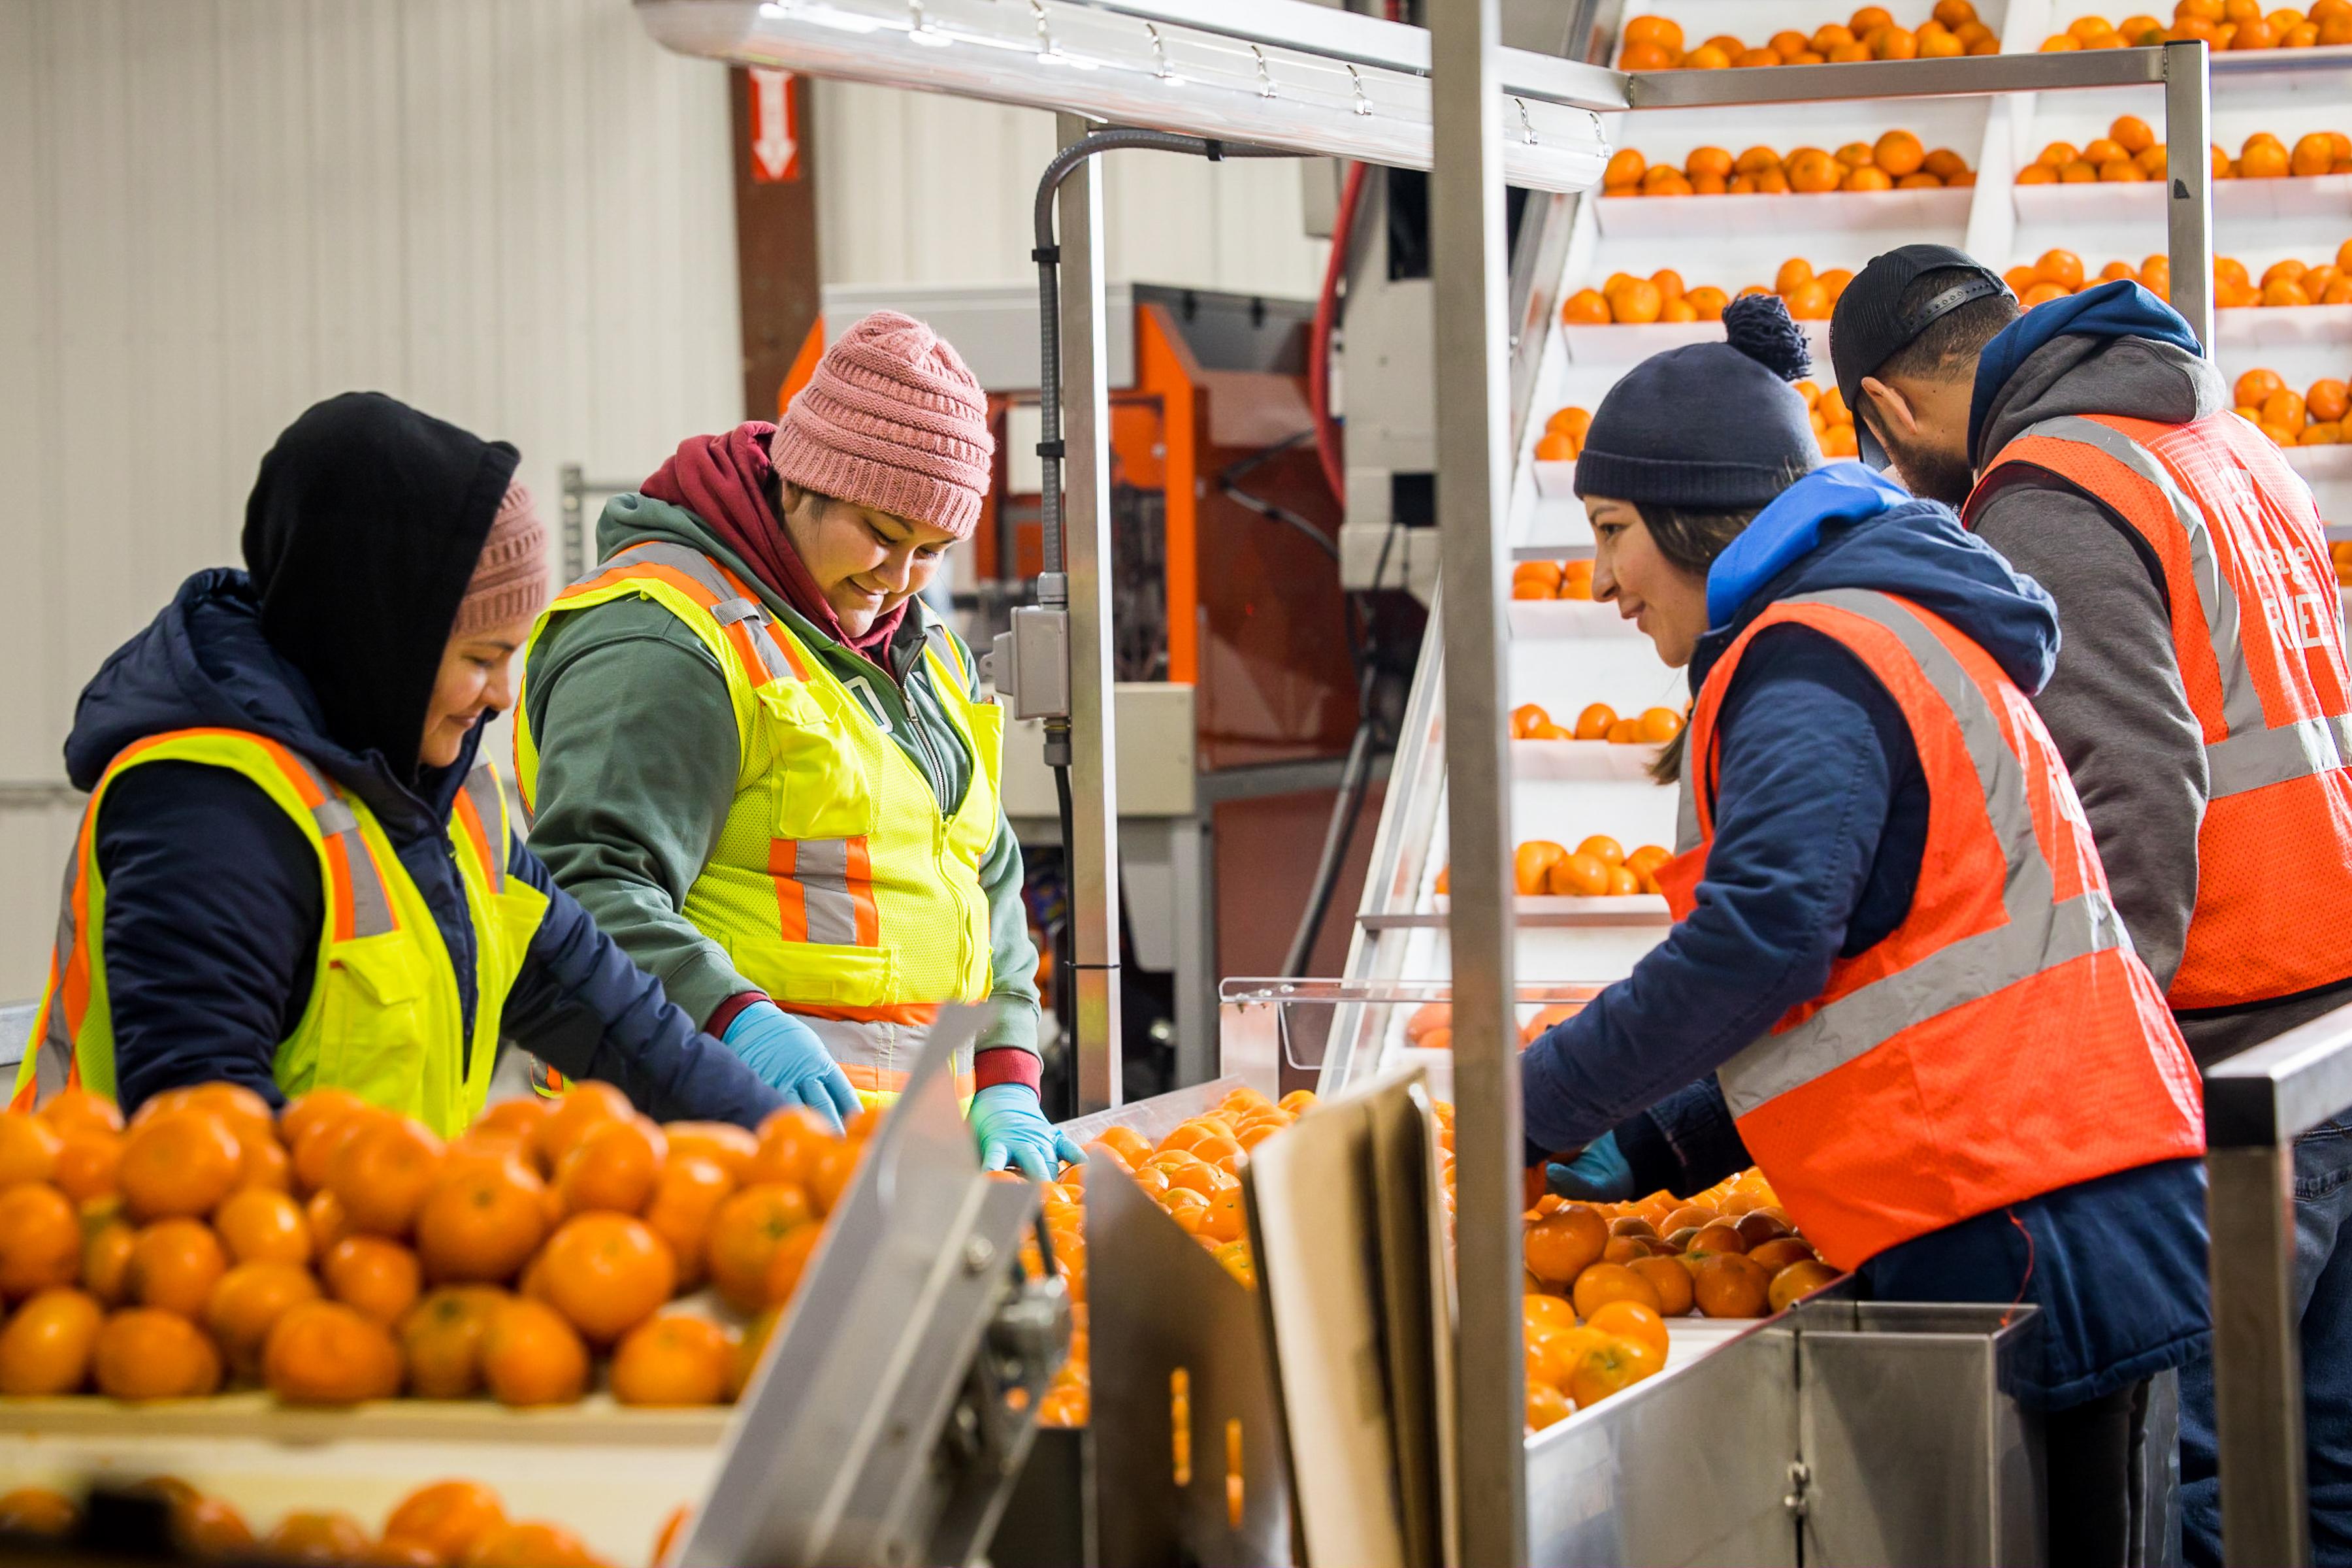 The Solution to Feeding the World Lies in the Cold Chain